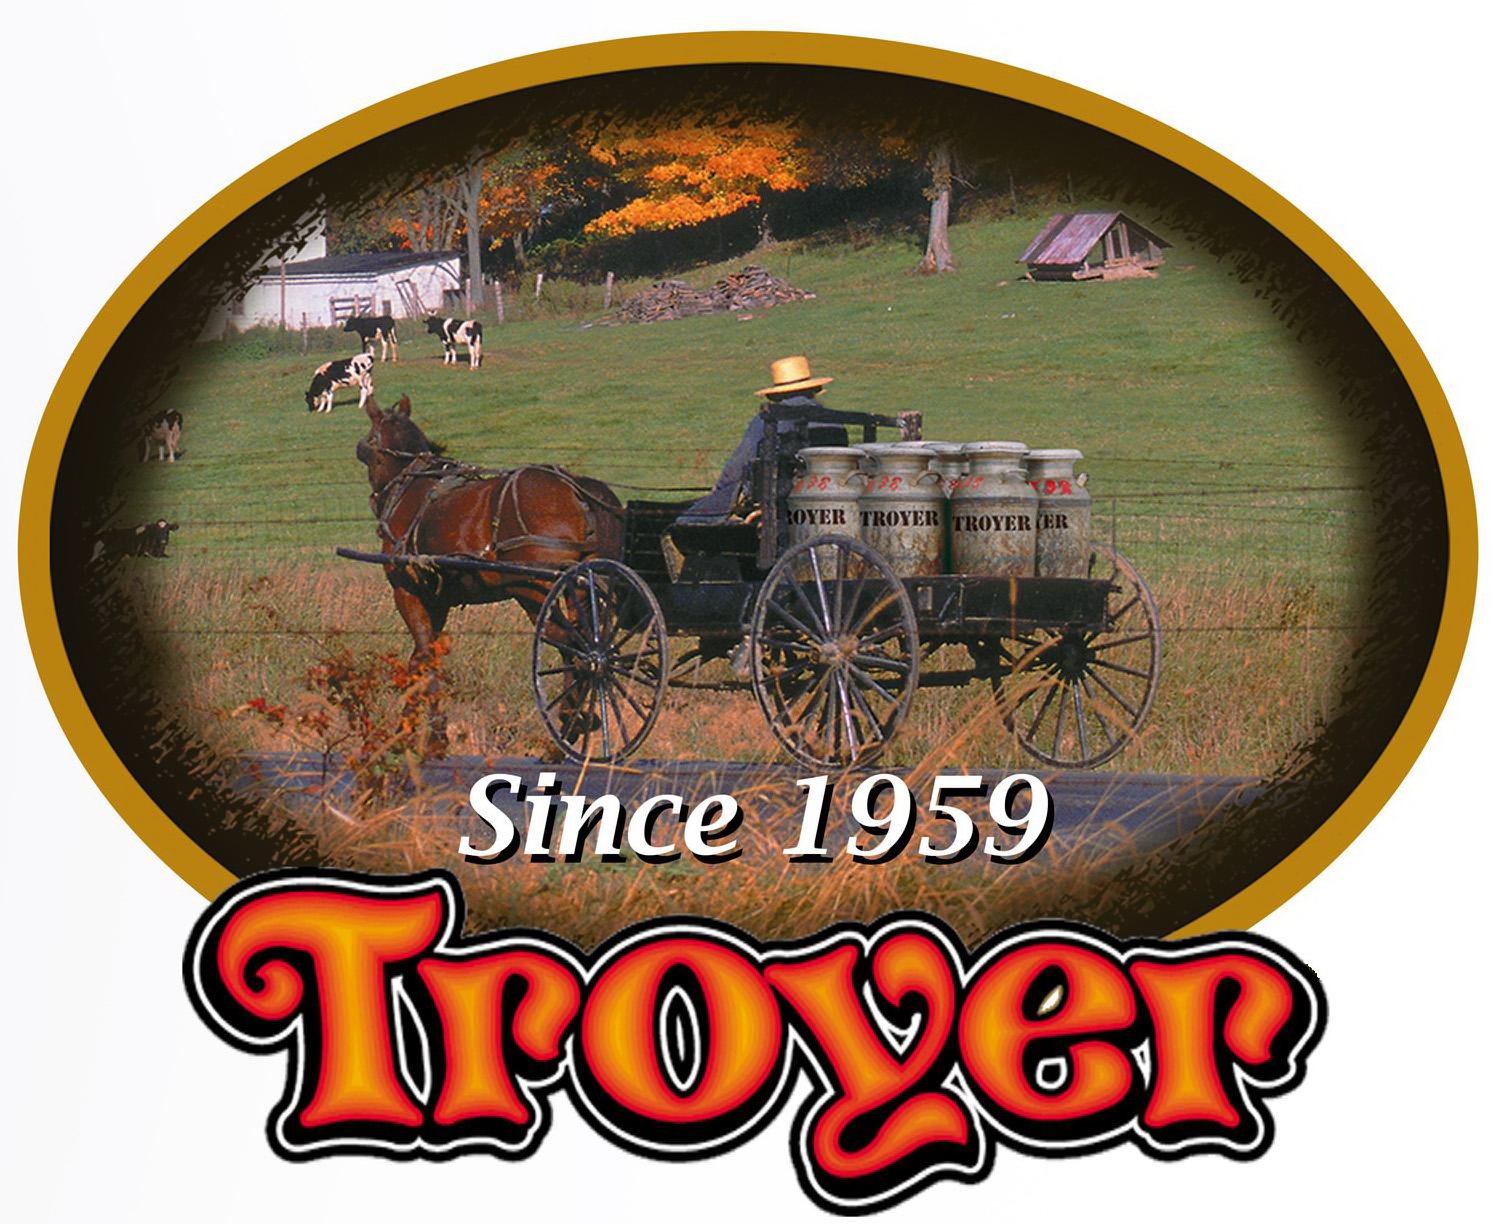  TROYER SINCE 1959